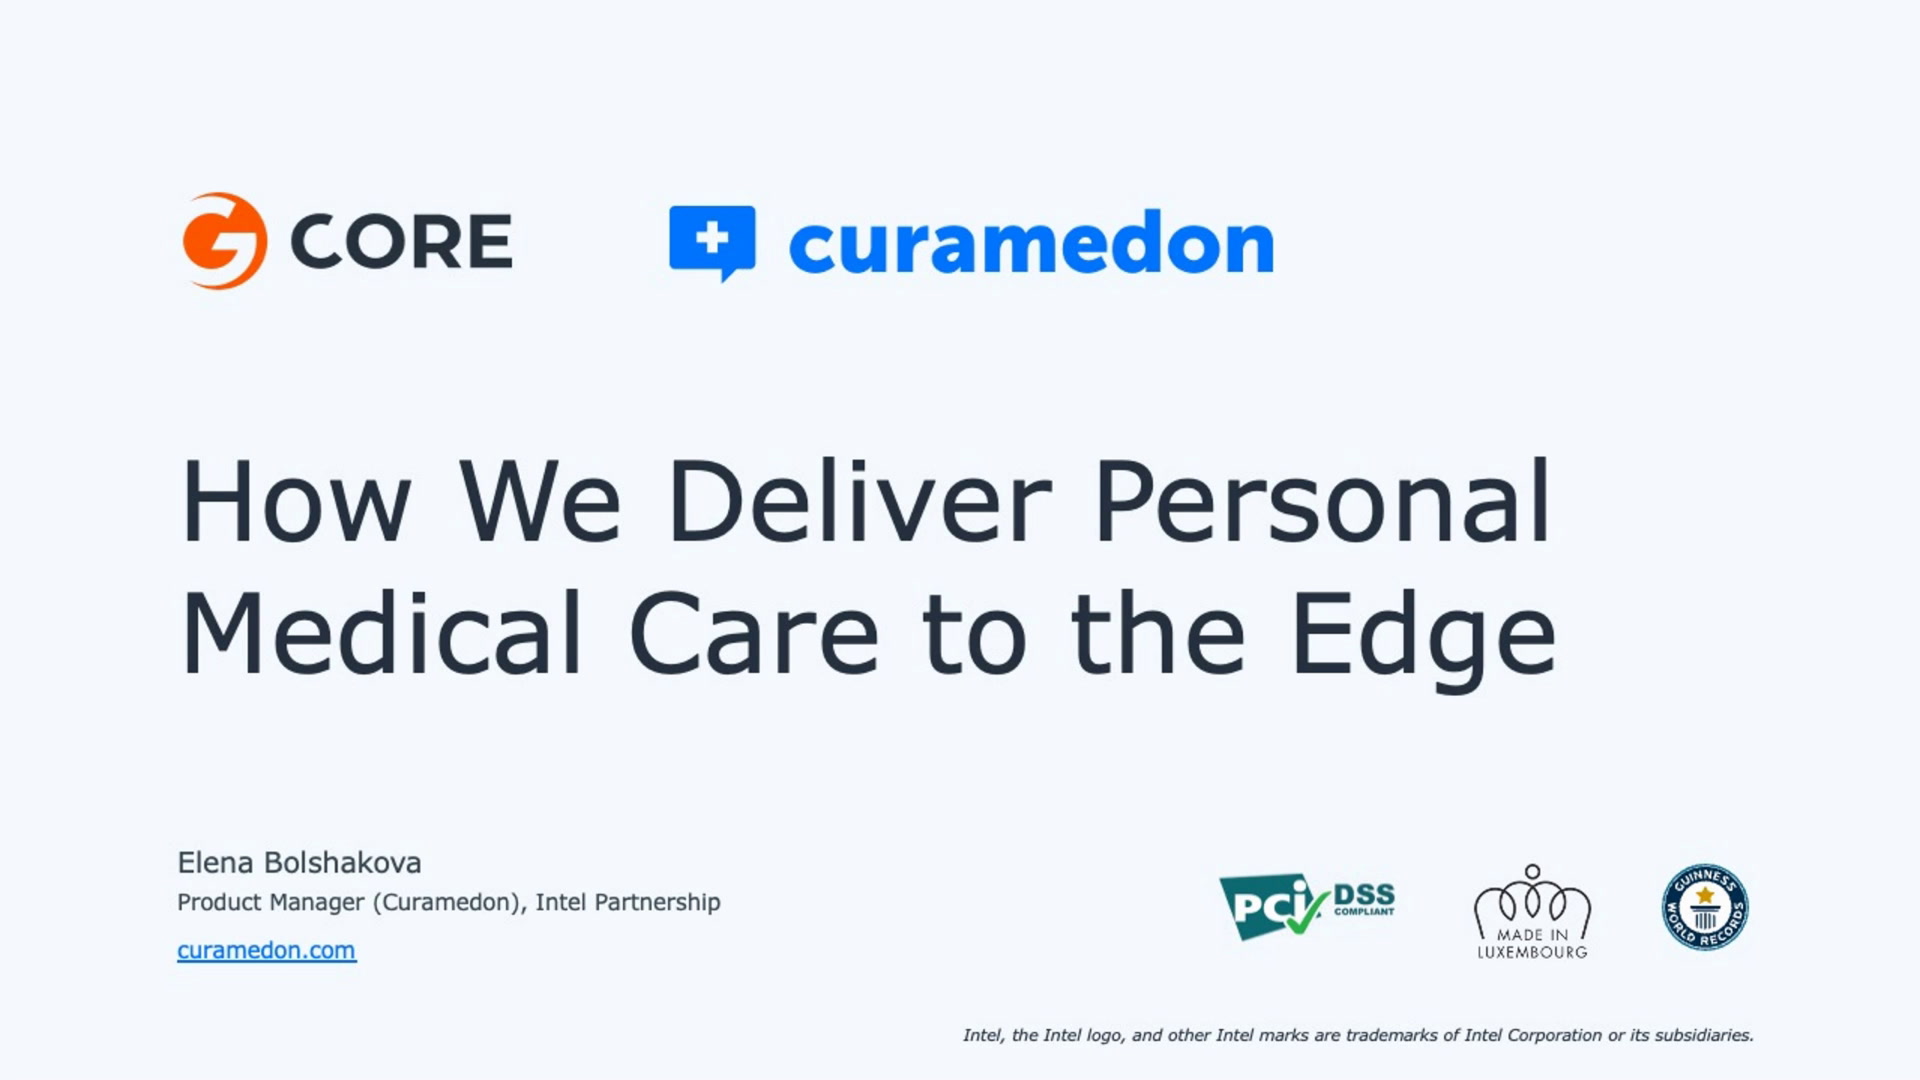 How We Deliver Personal Medical Care to the Edge